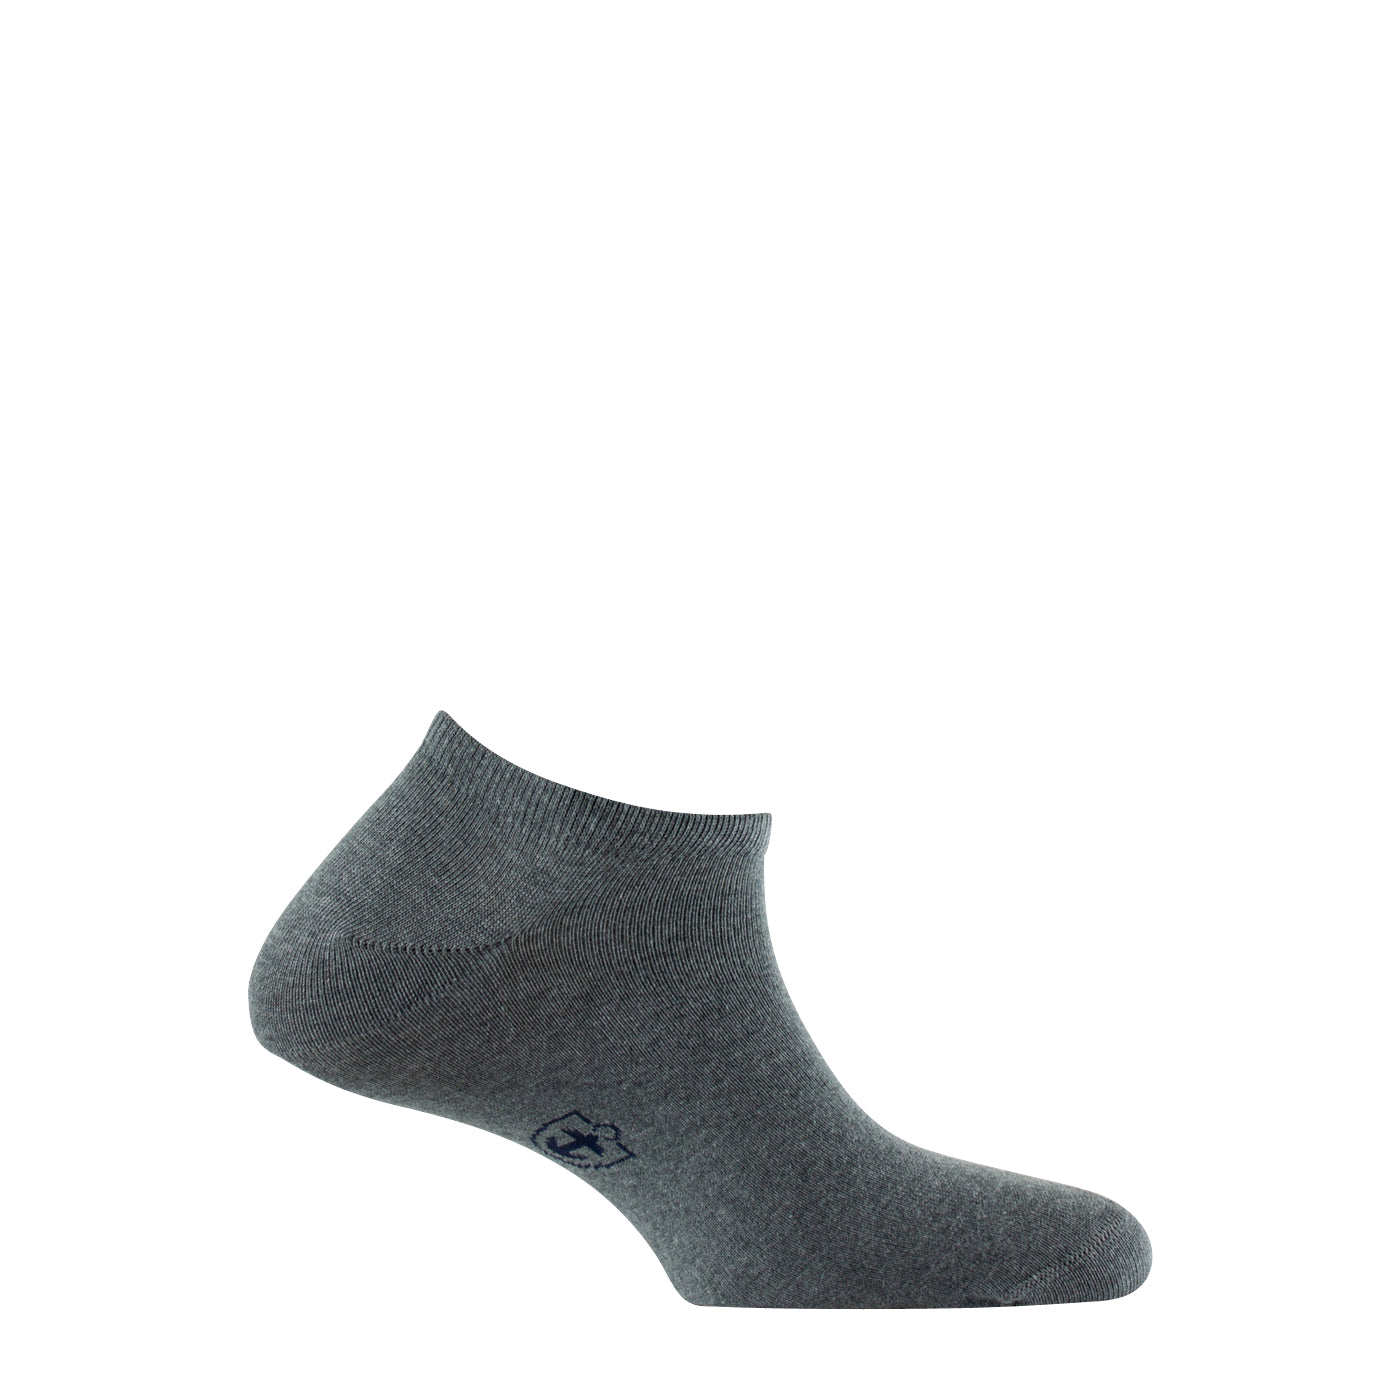 Pack of 3 pairs of Heather Gray Stretch socks